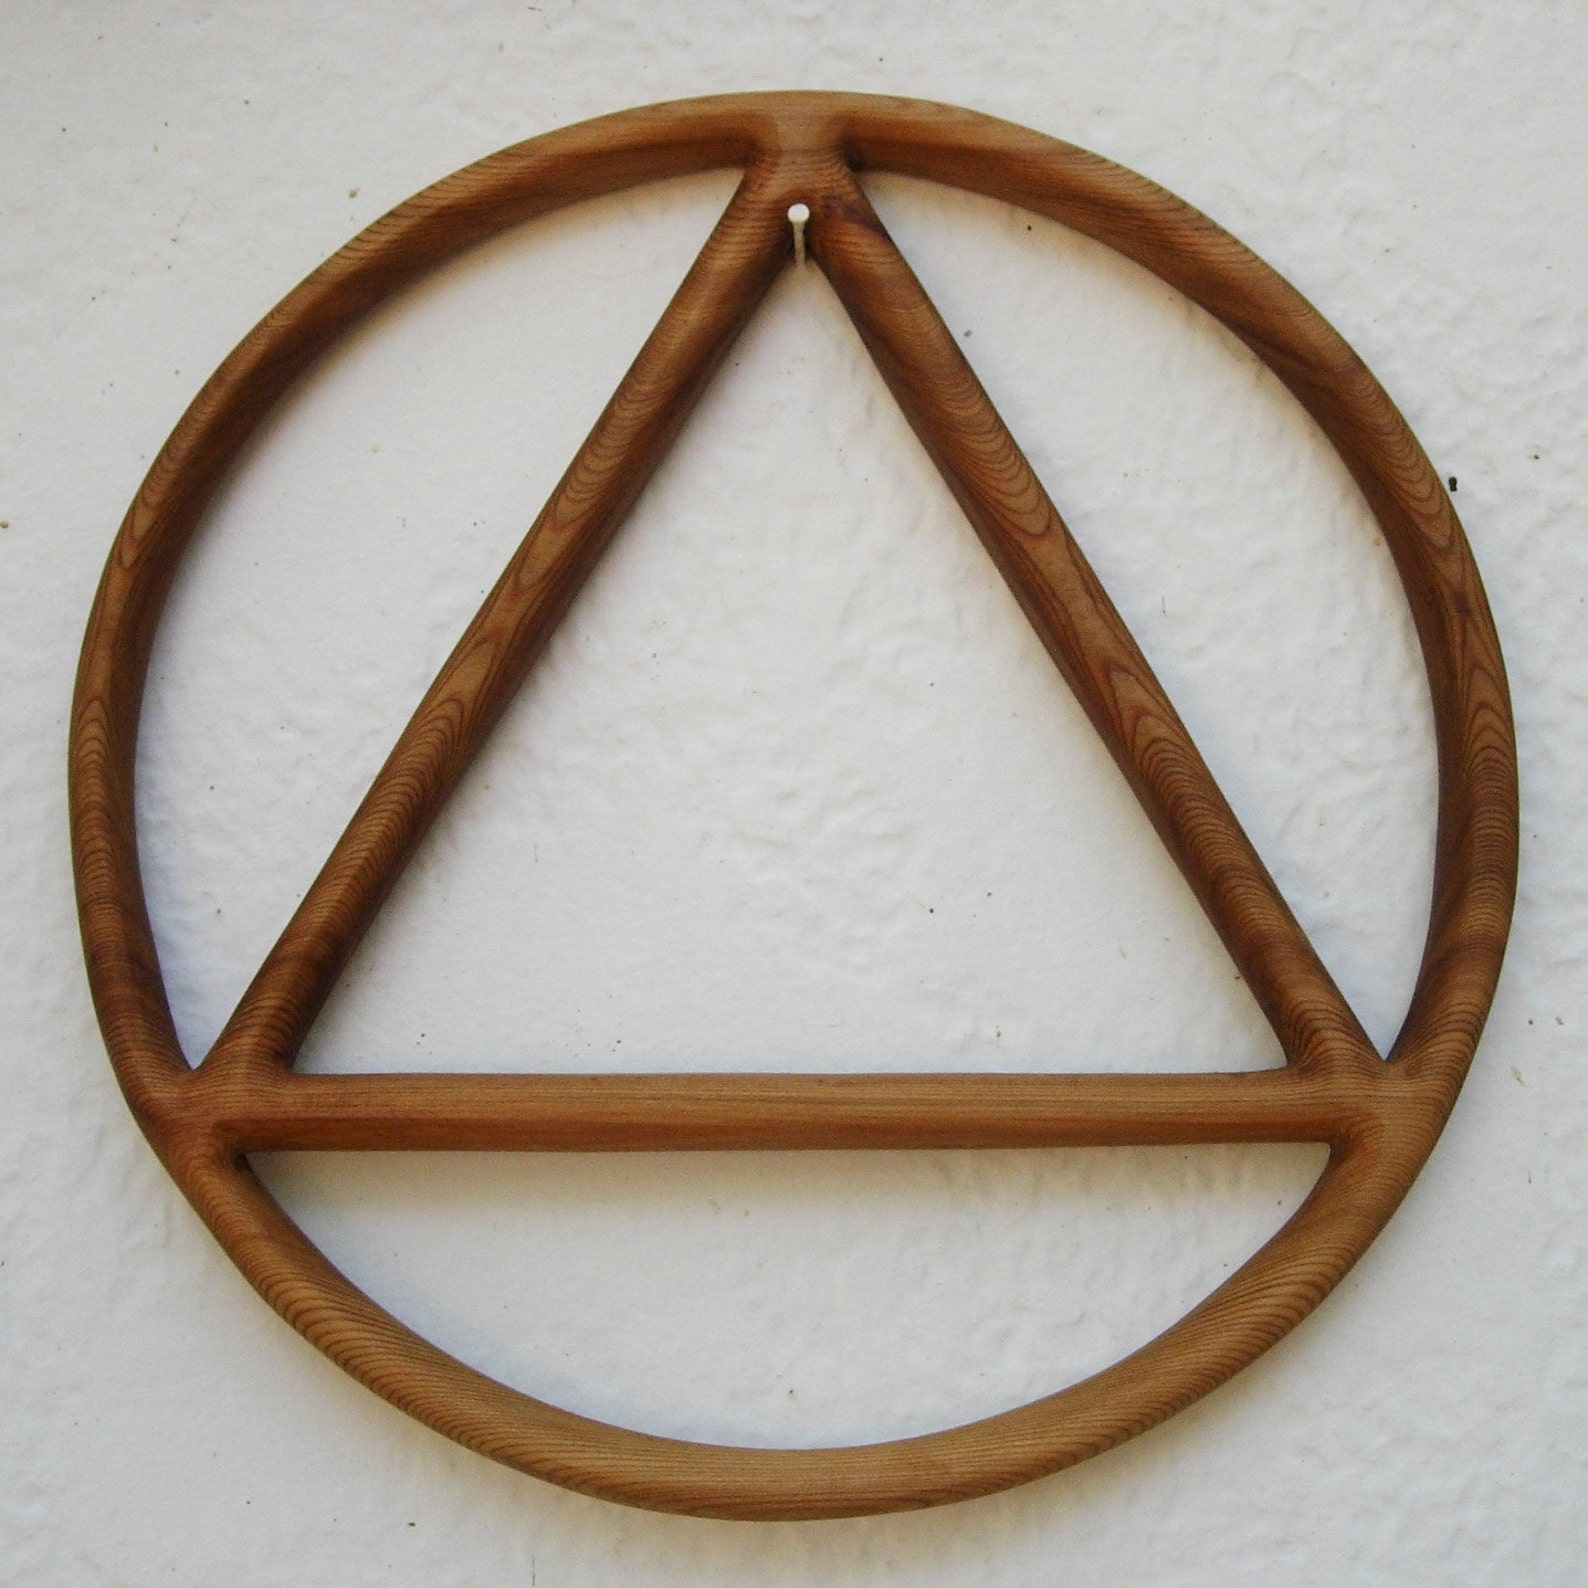 Sobriety Circle and Triangle-Wood Carved AA Recovery 12 Step image 0.